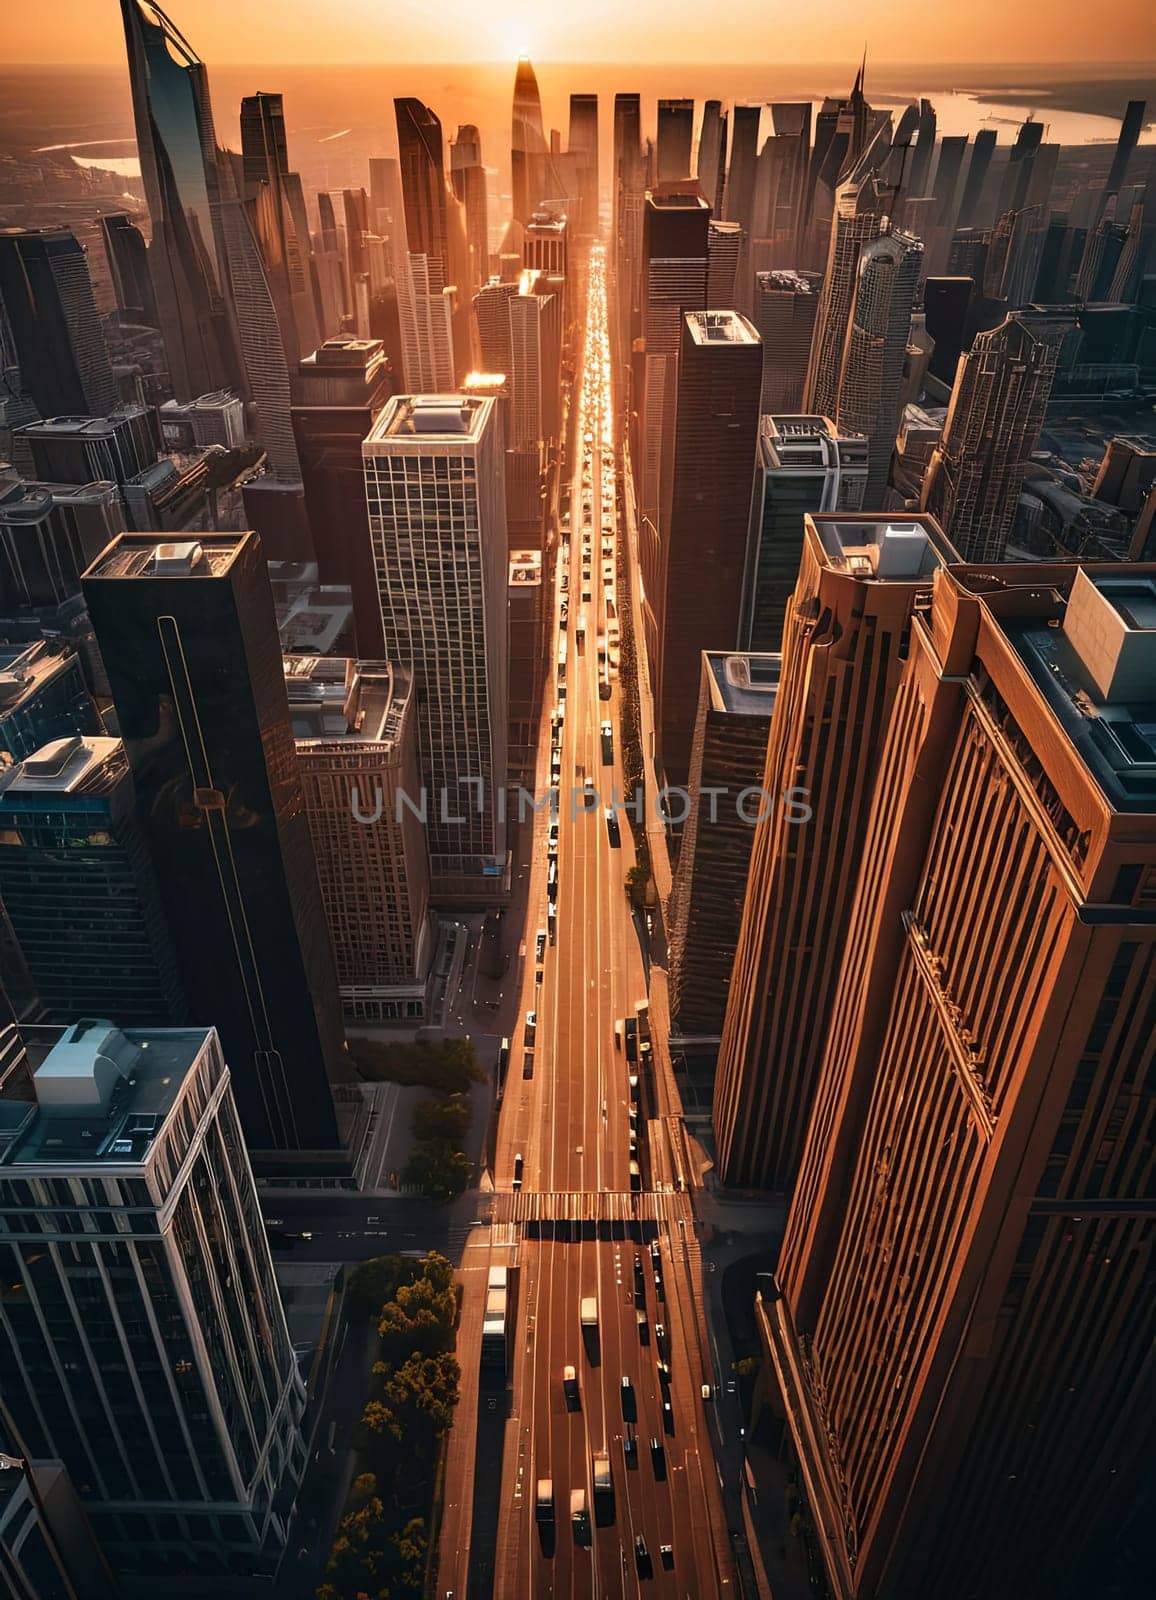 High-rise buildings line both sides of a wide street in a bustling city, viewed from above bathed in the warm glow of sunset. by Matiunina